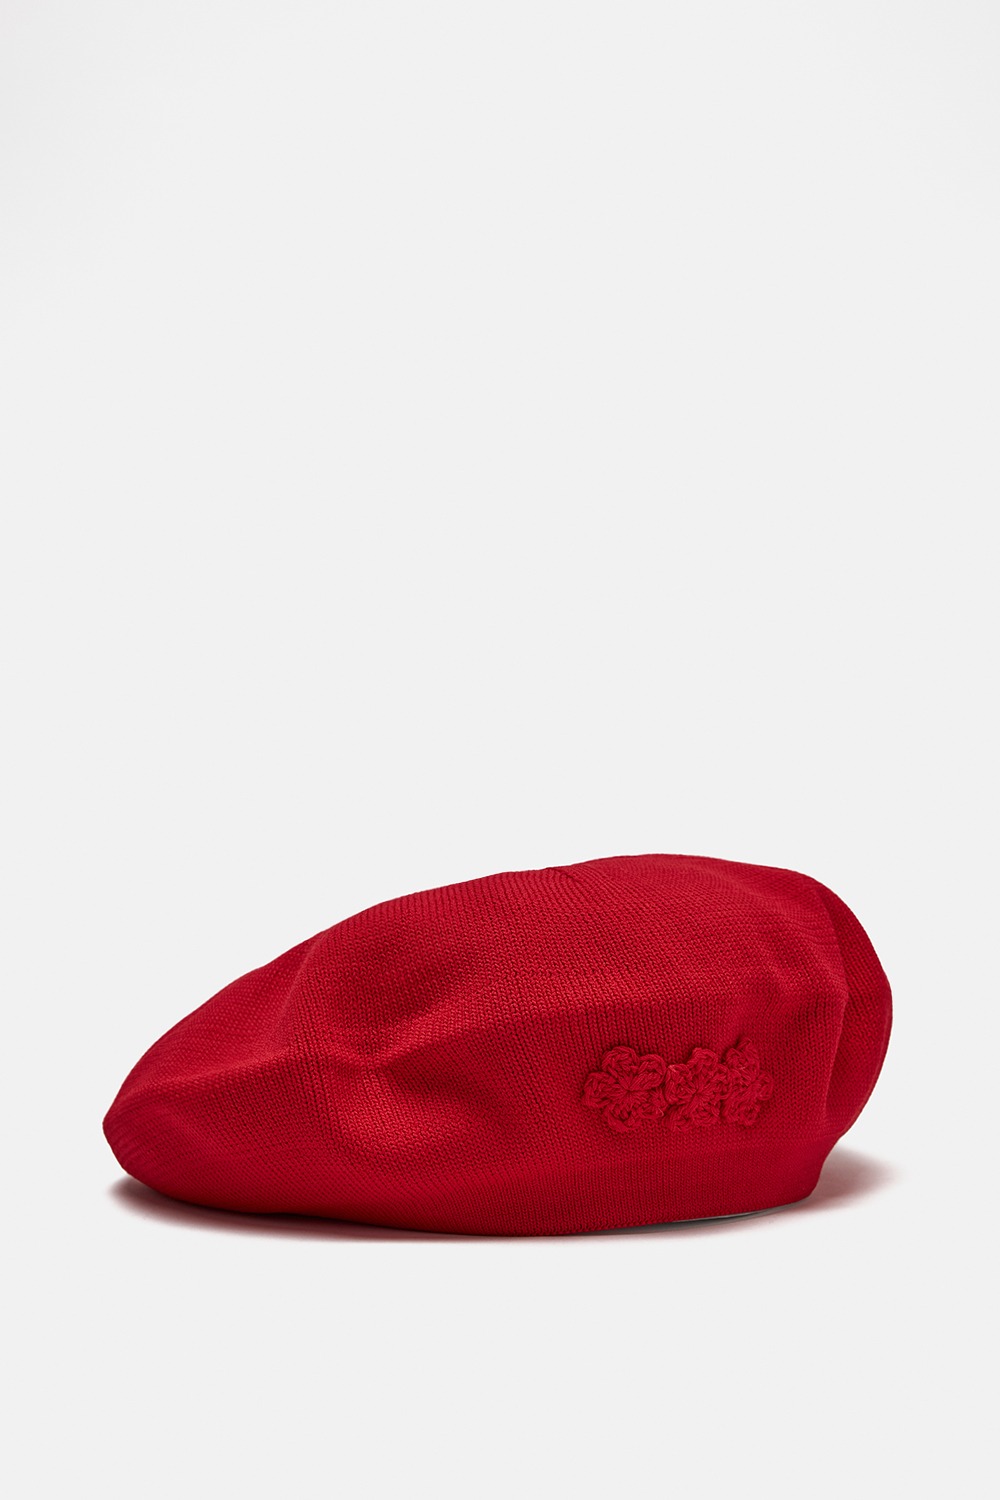 BBang Hat-Red